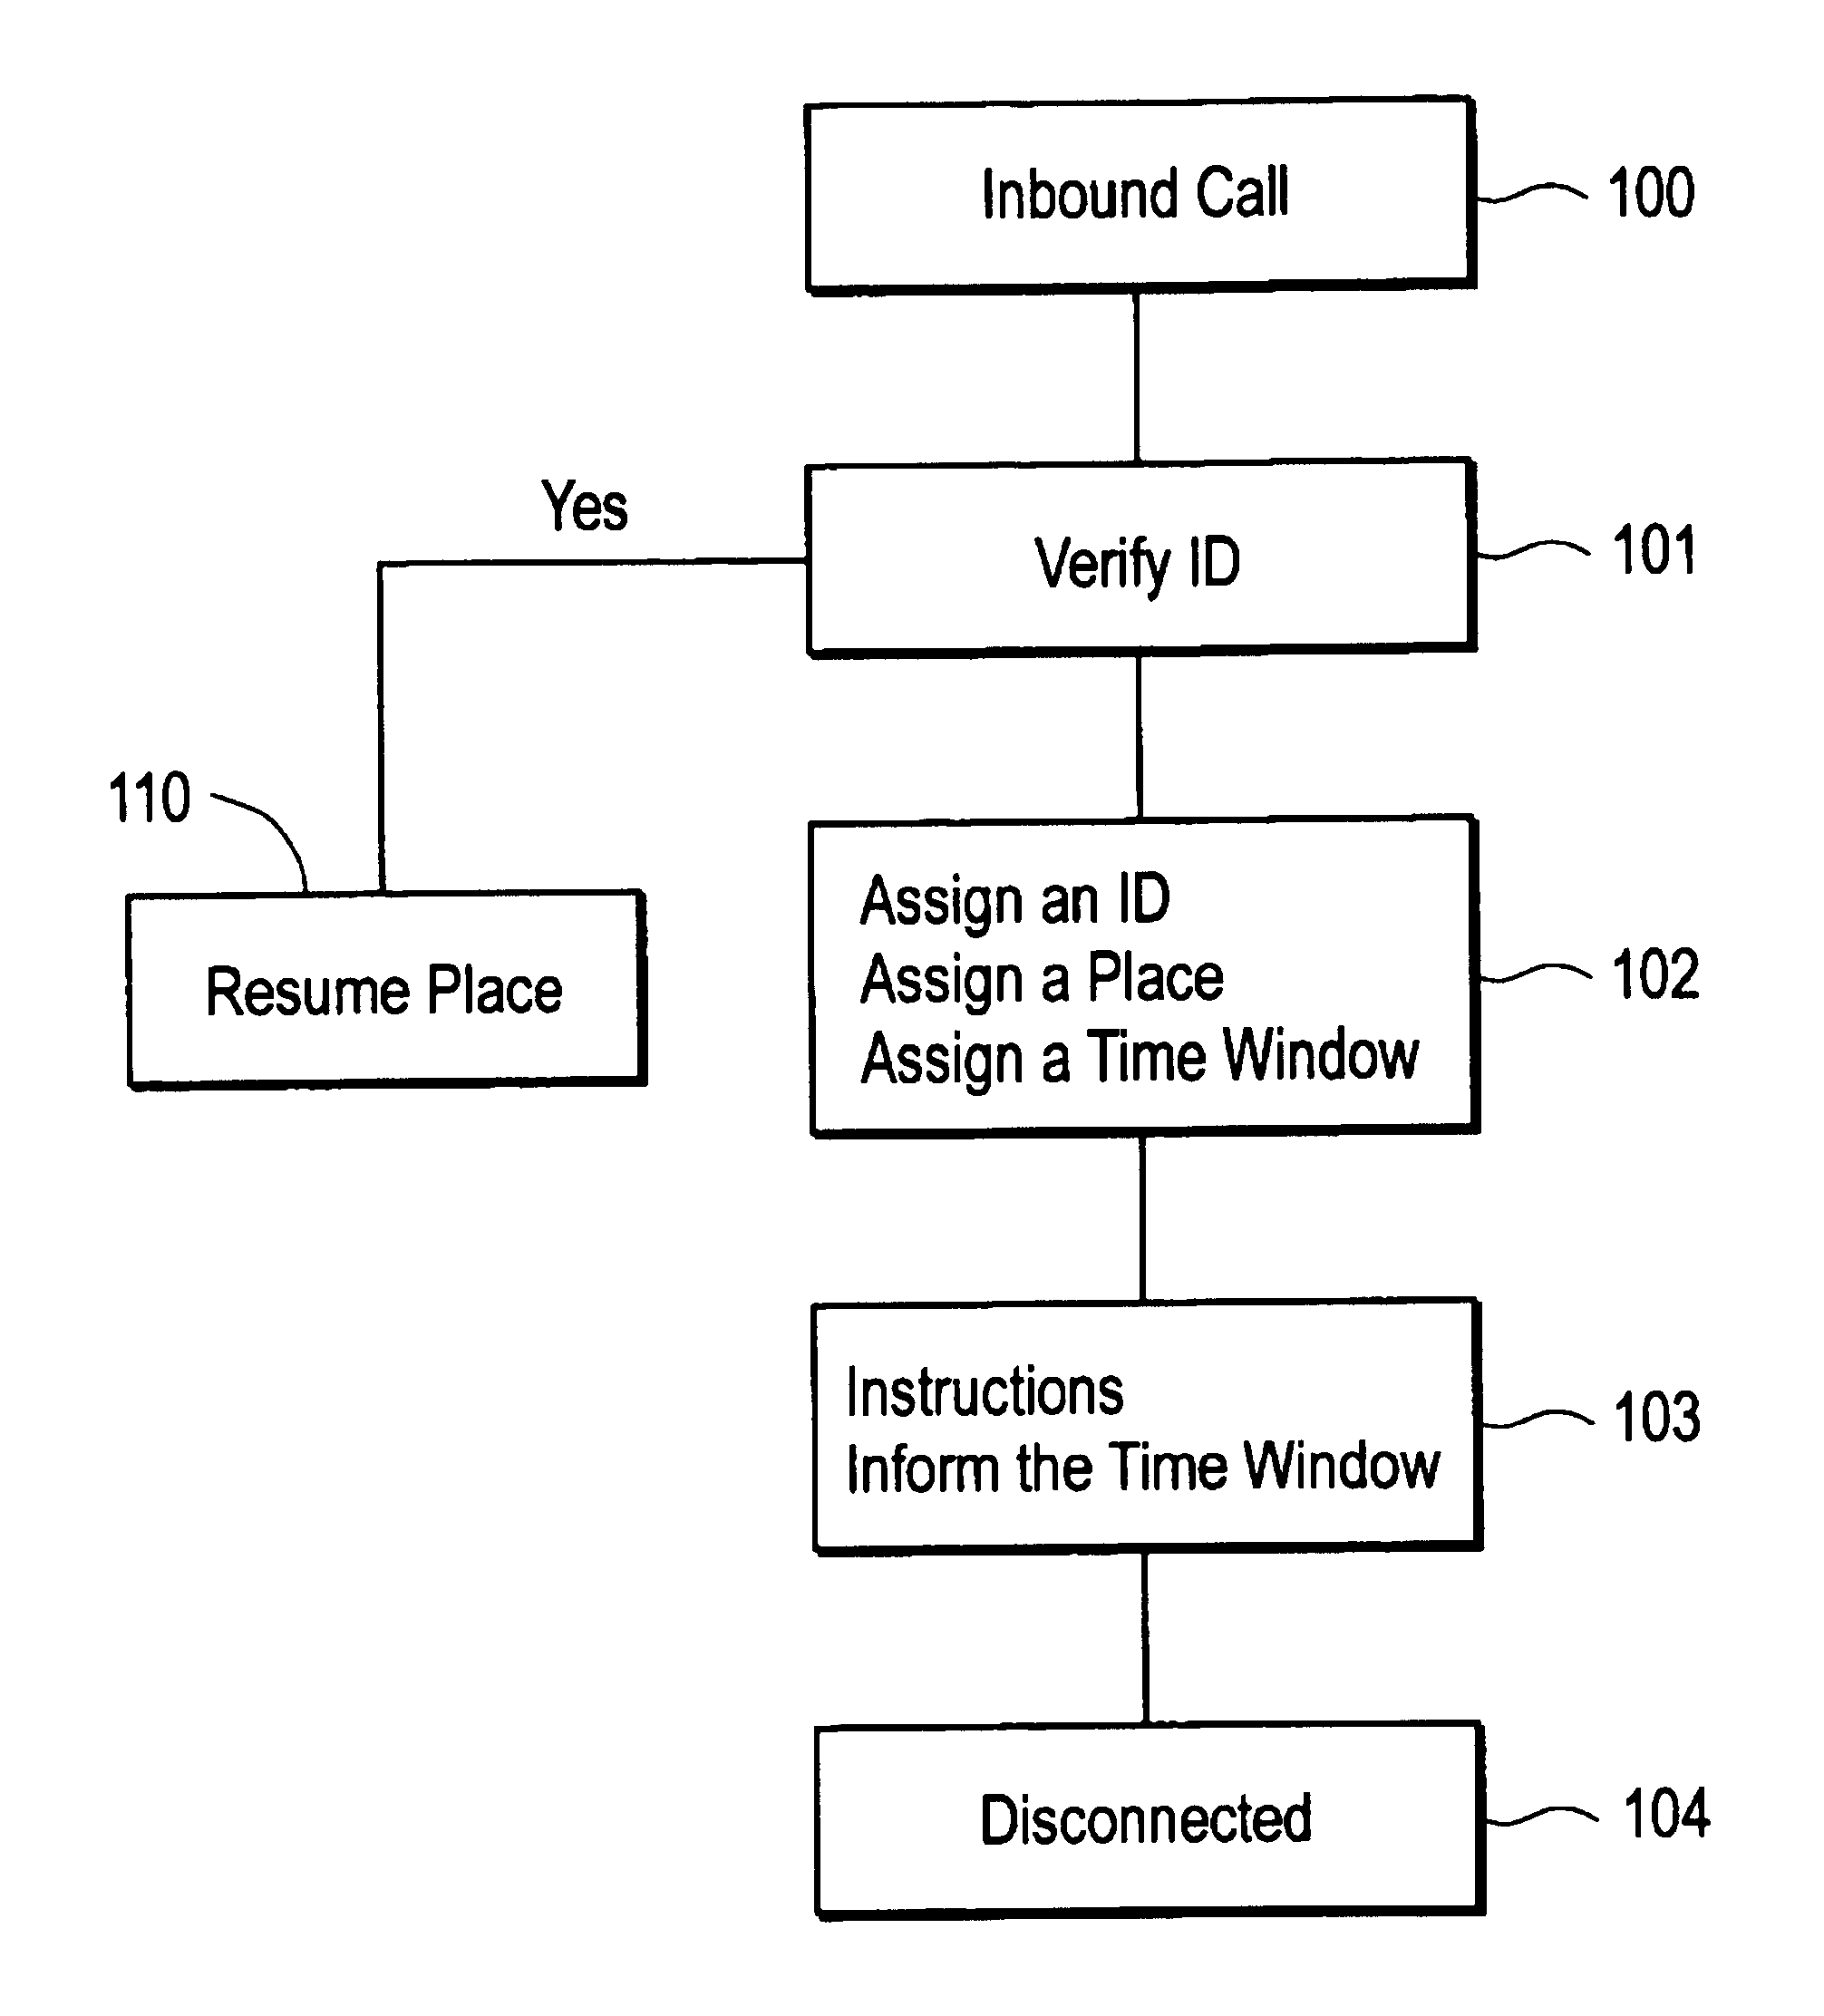 Method of processing an inbound call in a call center